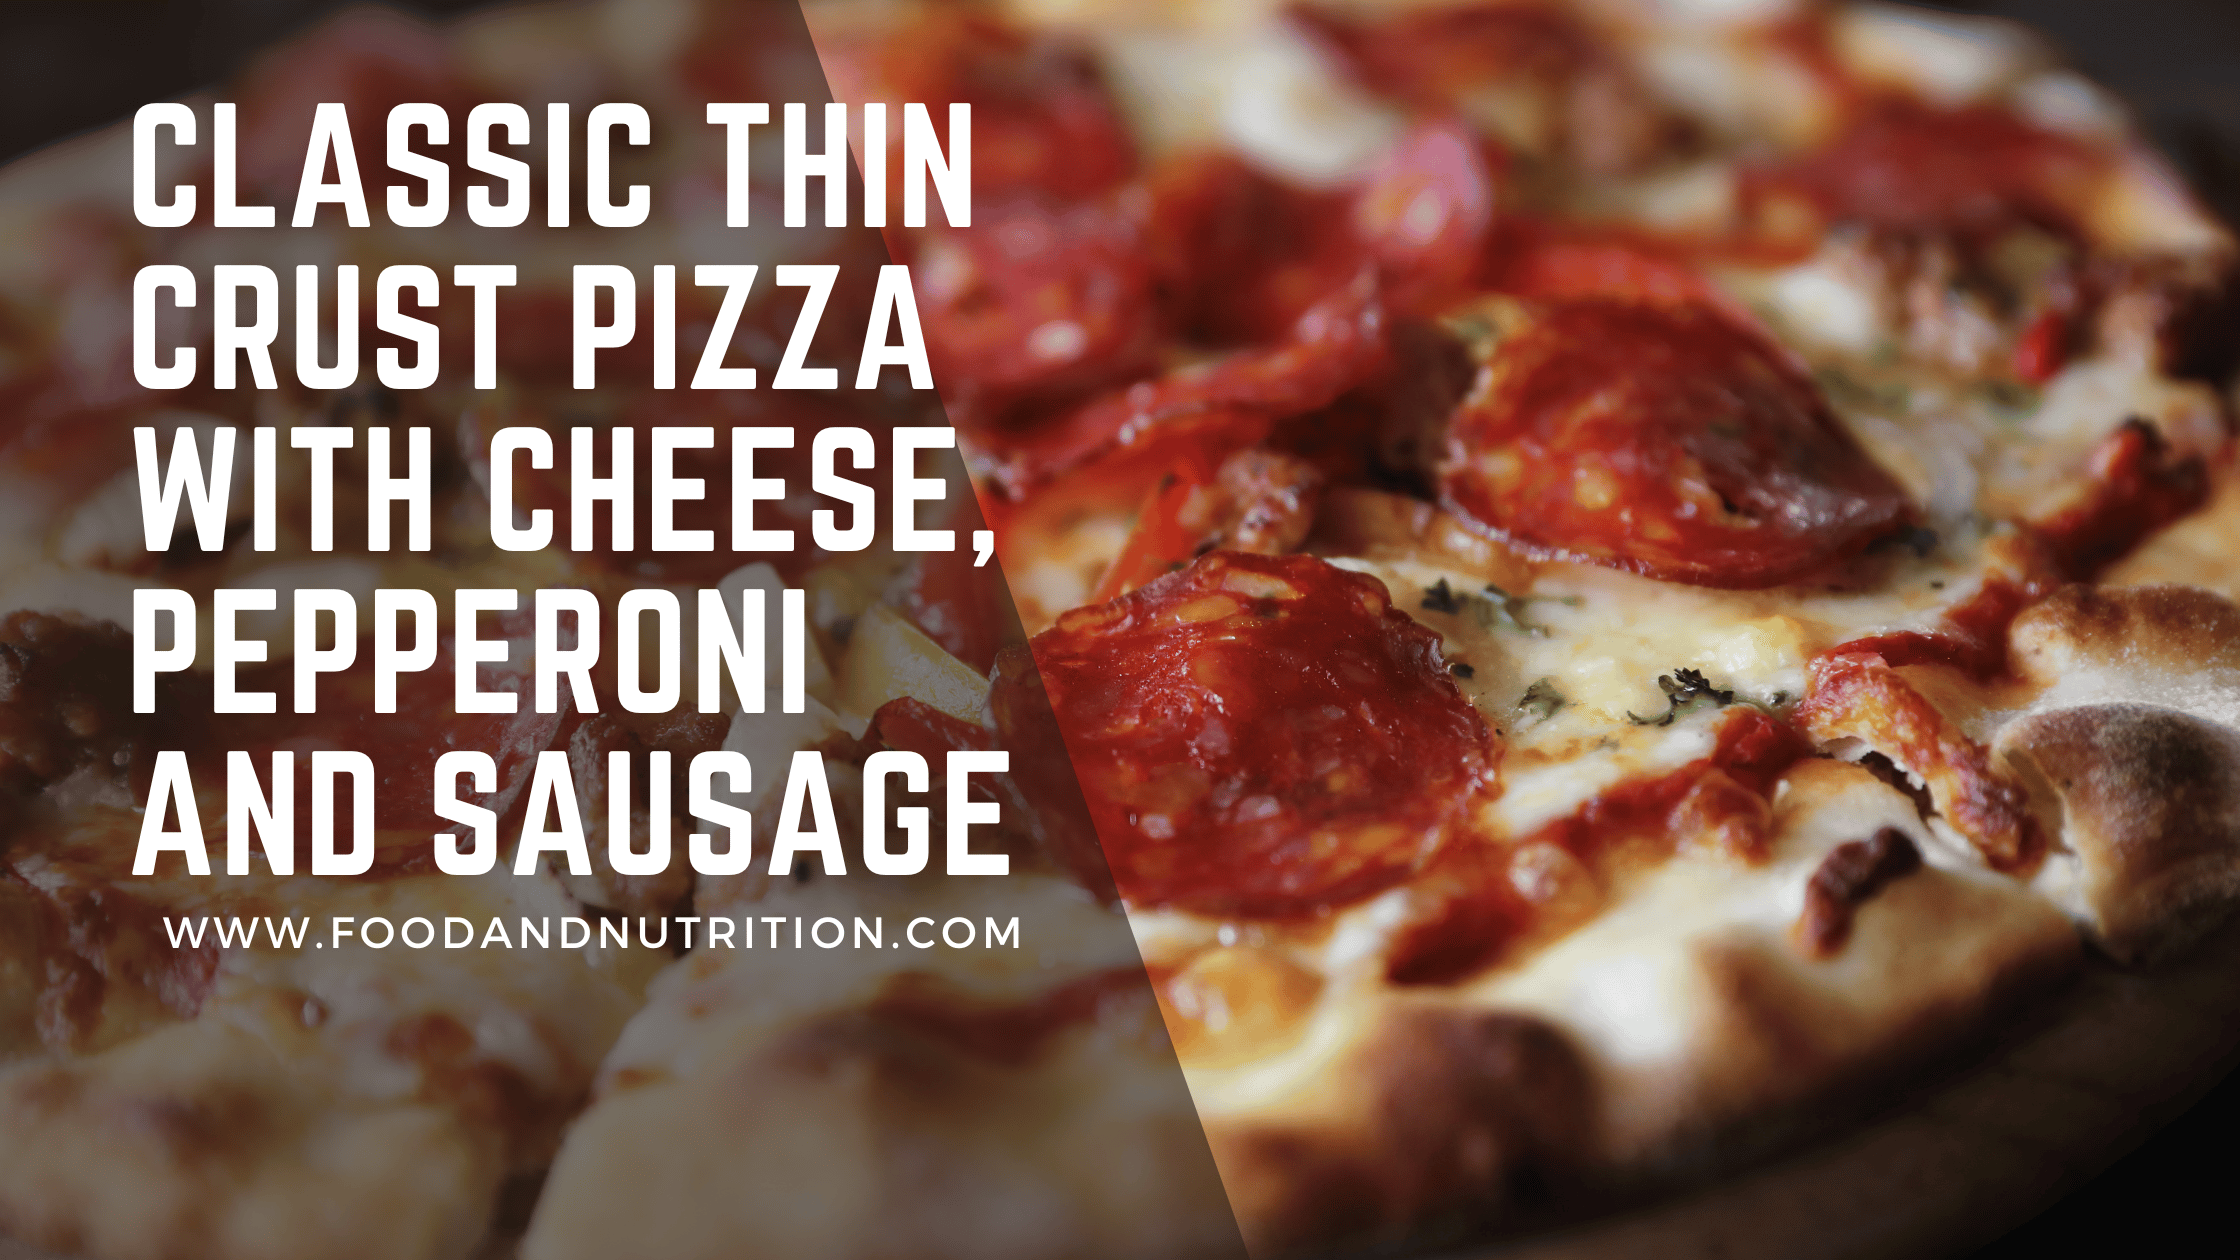 Classic Thin Crust Pizza with Cheese, Pepperoni and Sausage